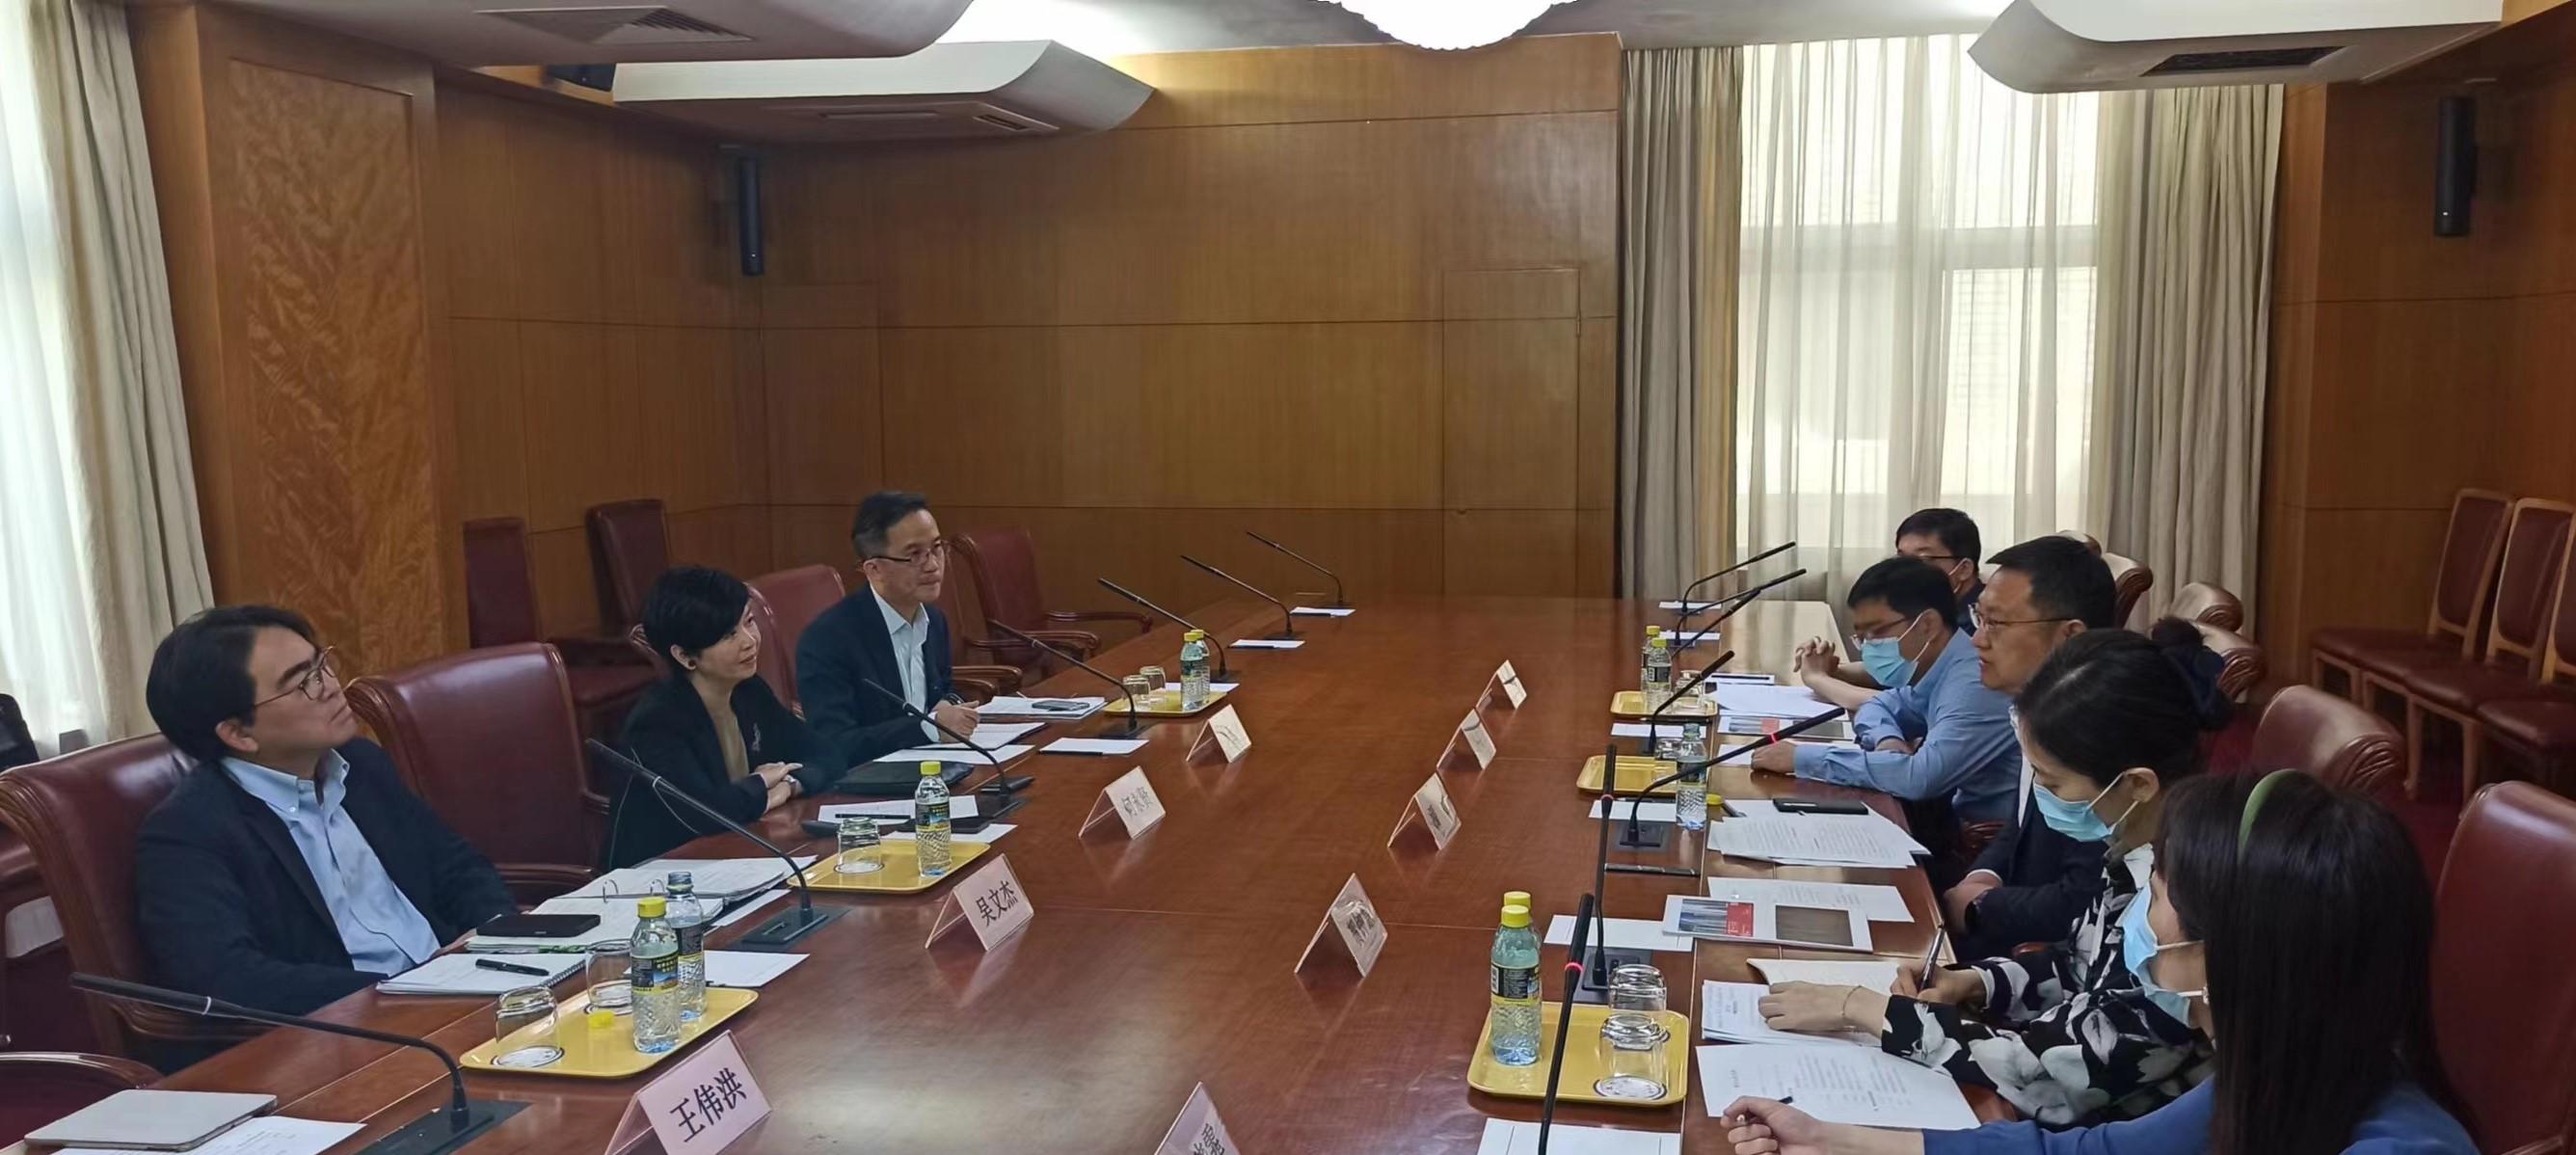 The Secretary for Housing, Ms Winnie Ho, was on the third day of her visit to Beijing today (June 1). Photo shows Ms Ho (second left) calling on the National Development and Reform Commission and meeting with the Deputy Director-General of the International Cooperation Department and Director General of International Affairs Department, Office of the Leading Group for Promoting the Belt and Road Initiative, Mr Pan Jiang (third right).